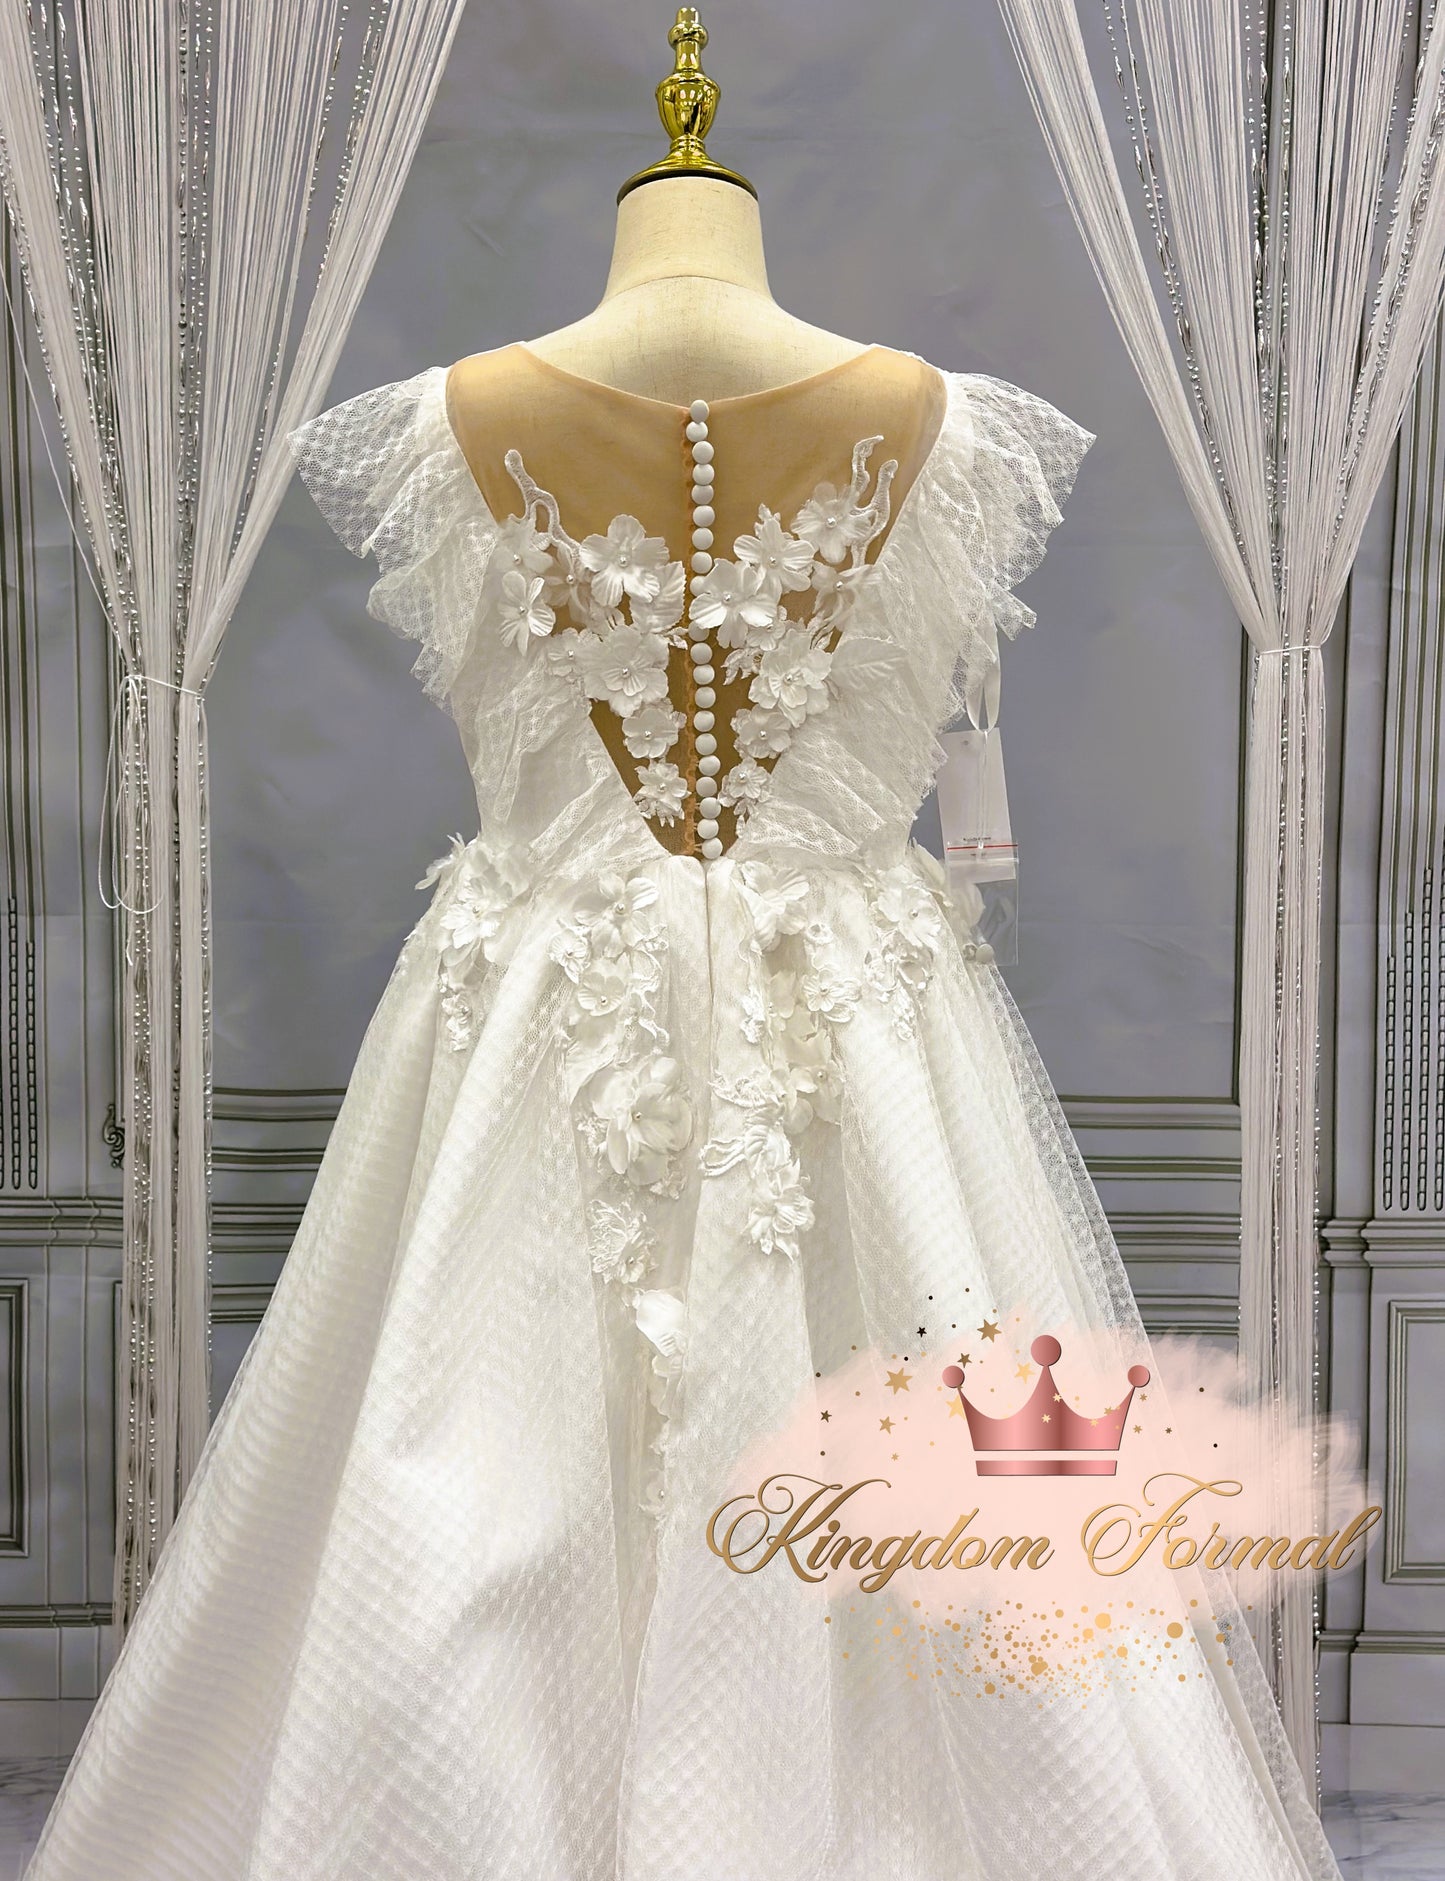 The Nerida Gown